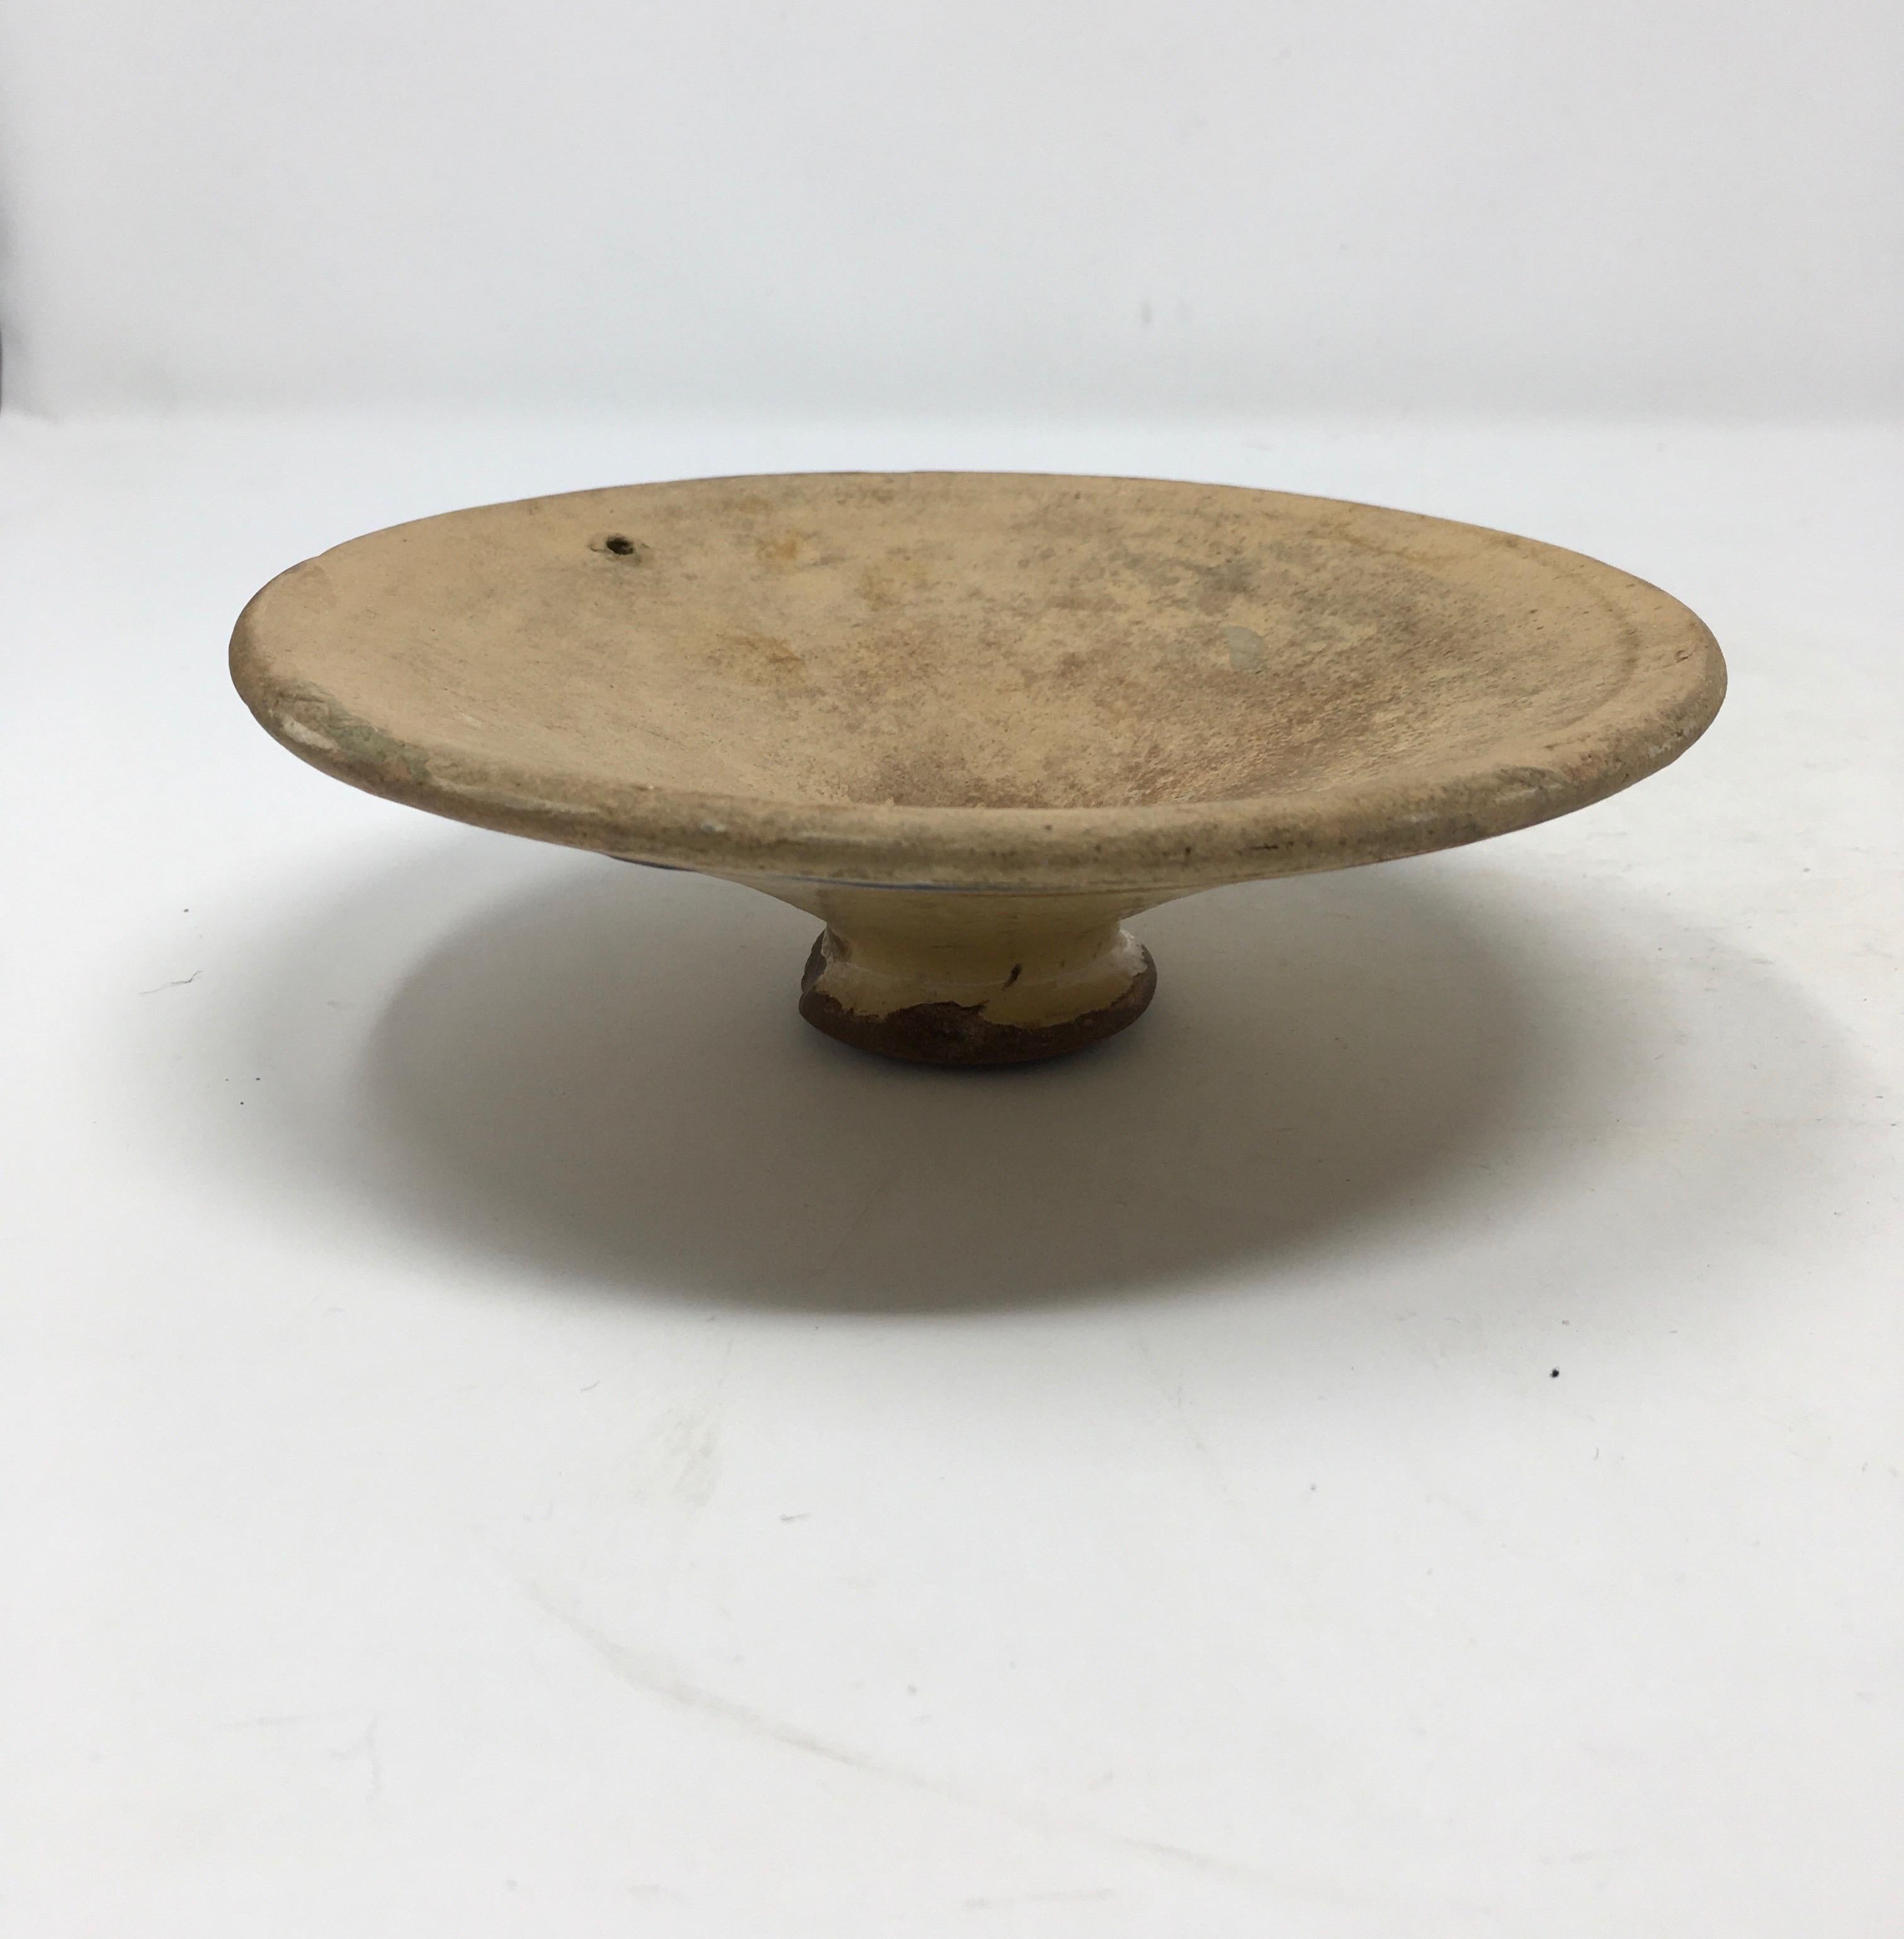 This unusual saucer or lid would make a nice compliment to a kitchen display. While it stands freely we are not sure if it was ever used on its own or was a lid to another piece which we do not have. Picture it placed on a stack of cookbooks!